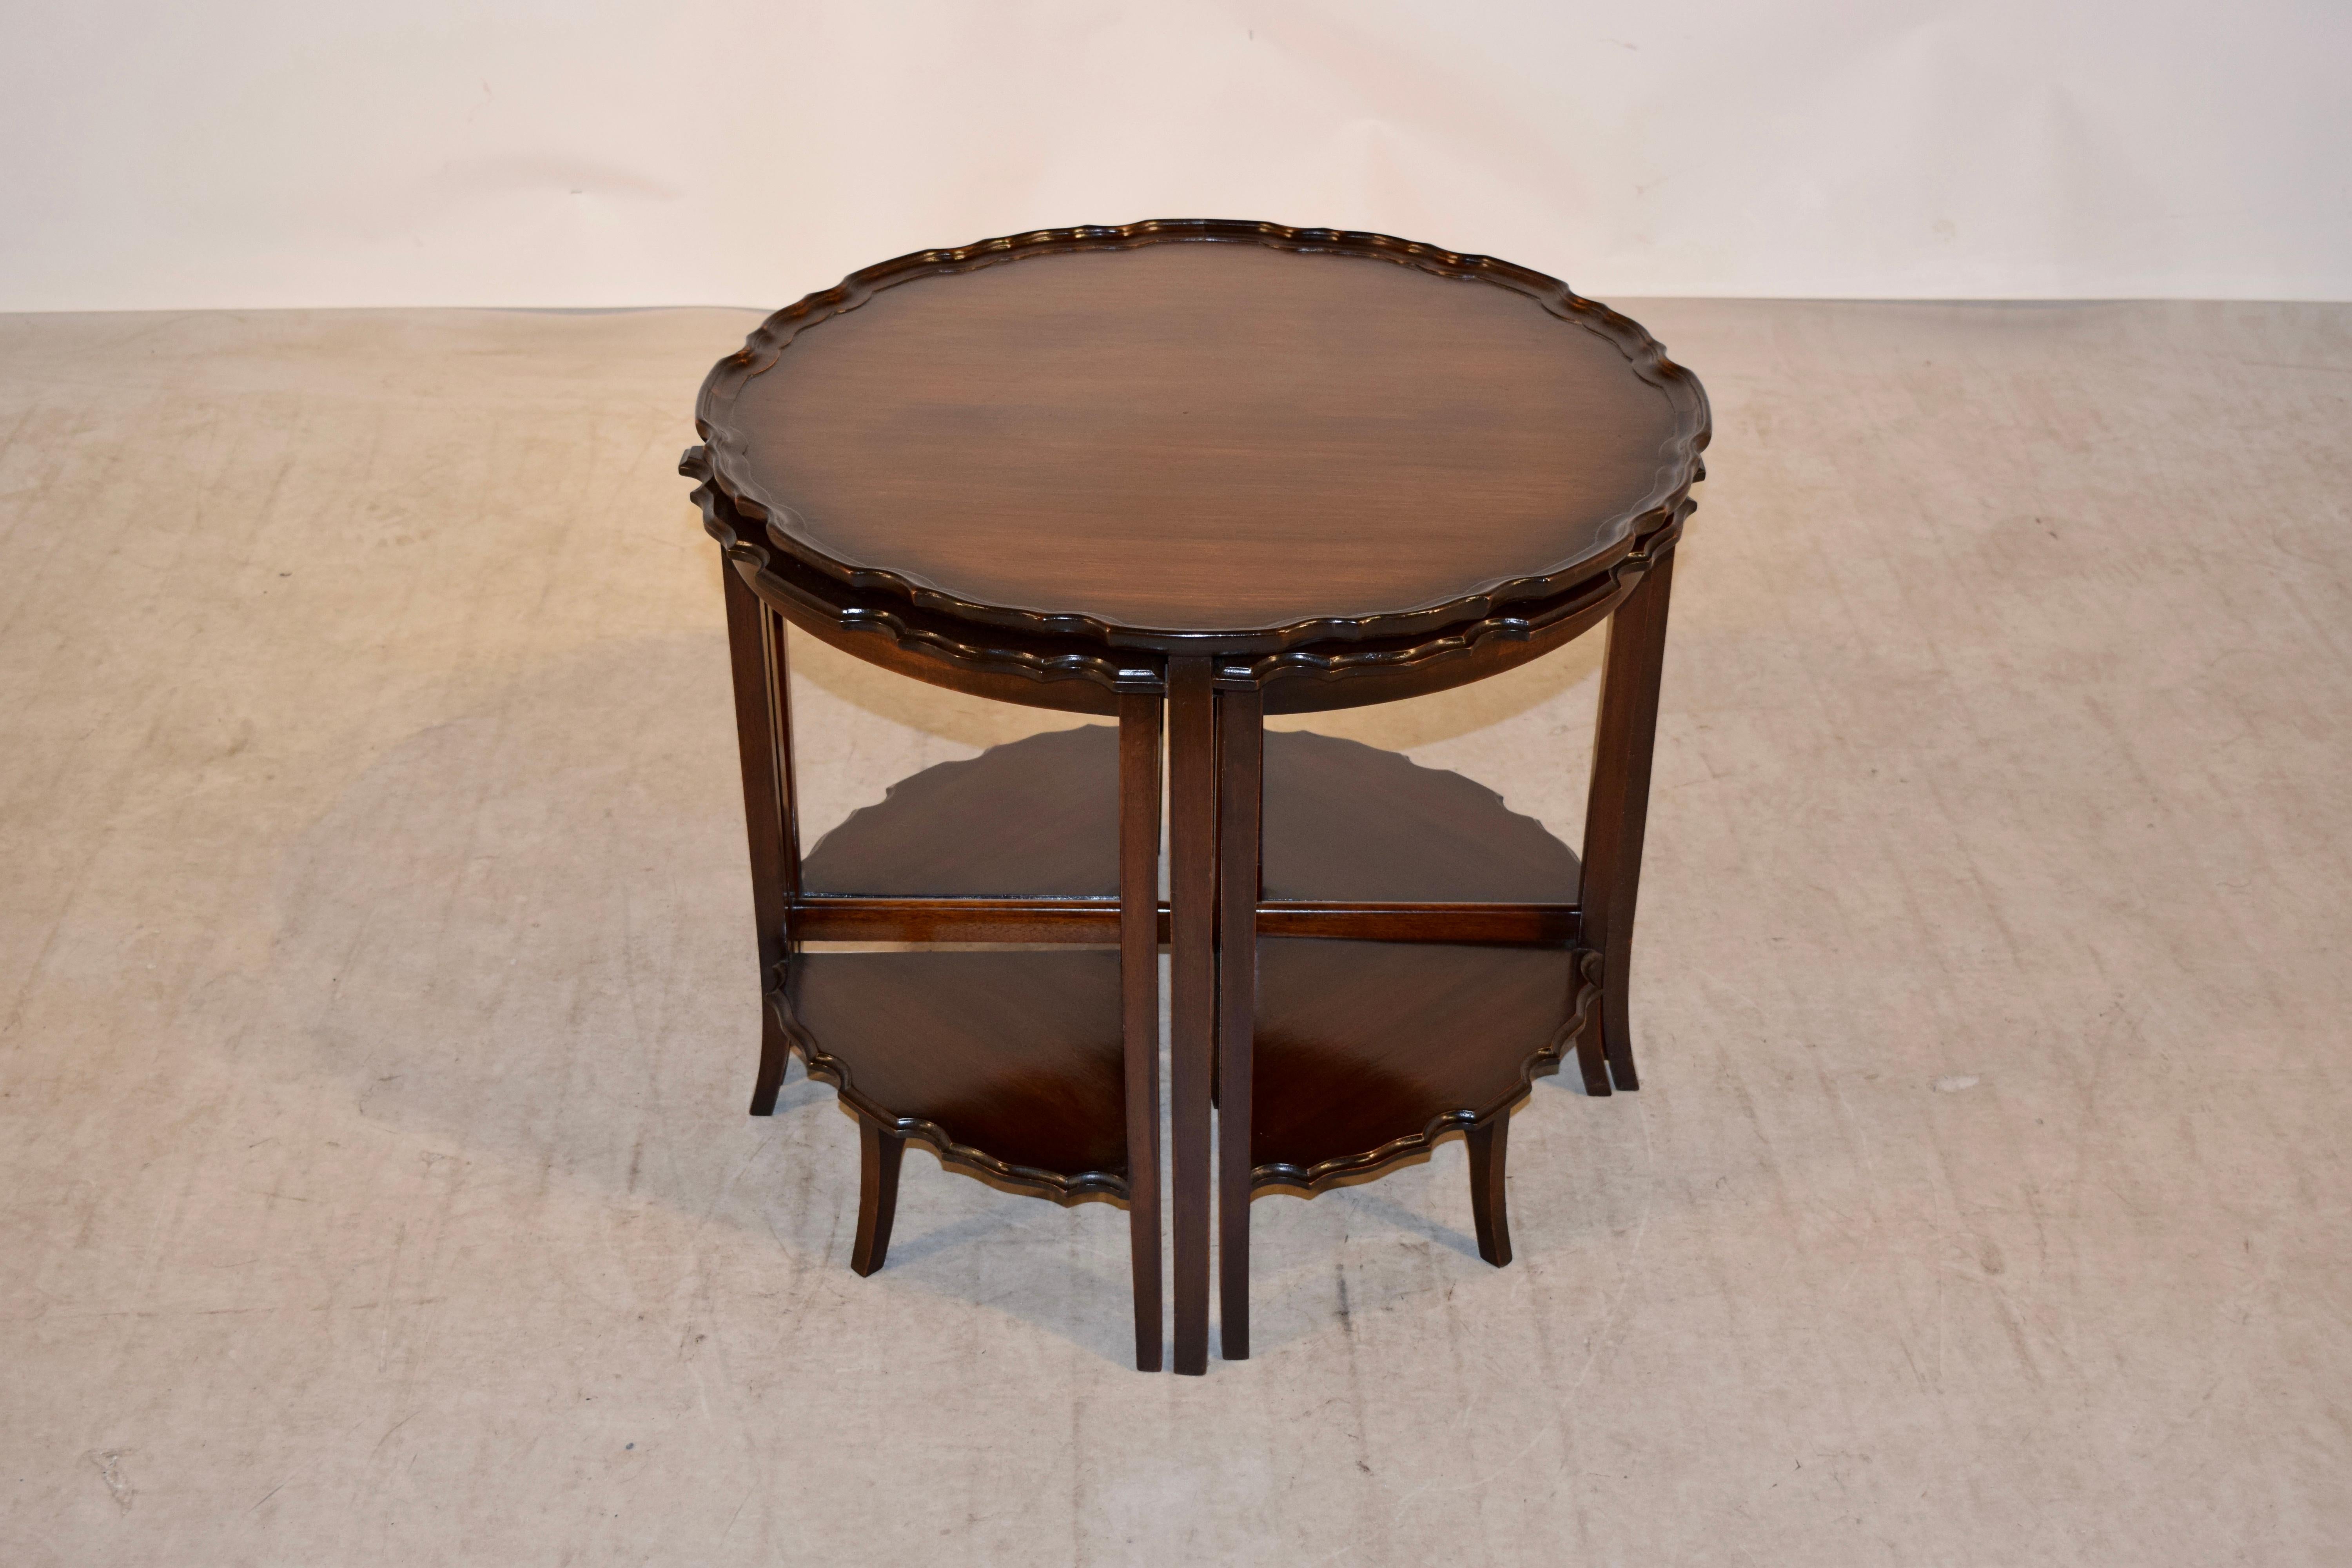 Mahogany nest of tables from England. The top of the central table has a molded pie crust edge, and is supported on four legs with splayed feet joined by cross stretchers. There are four additional small tables which nest underneath that have the